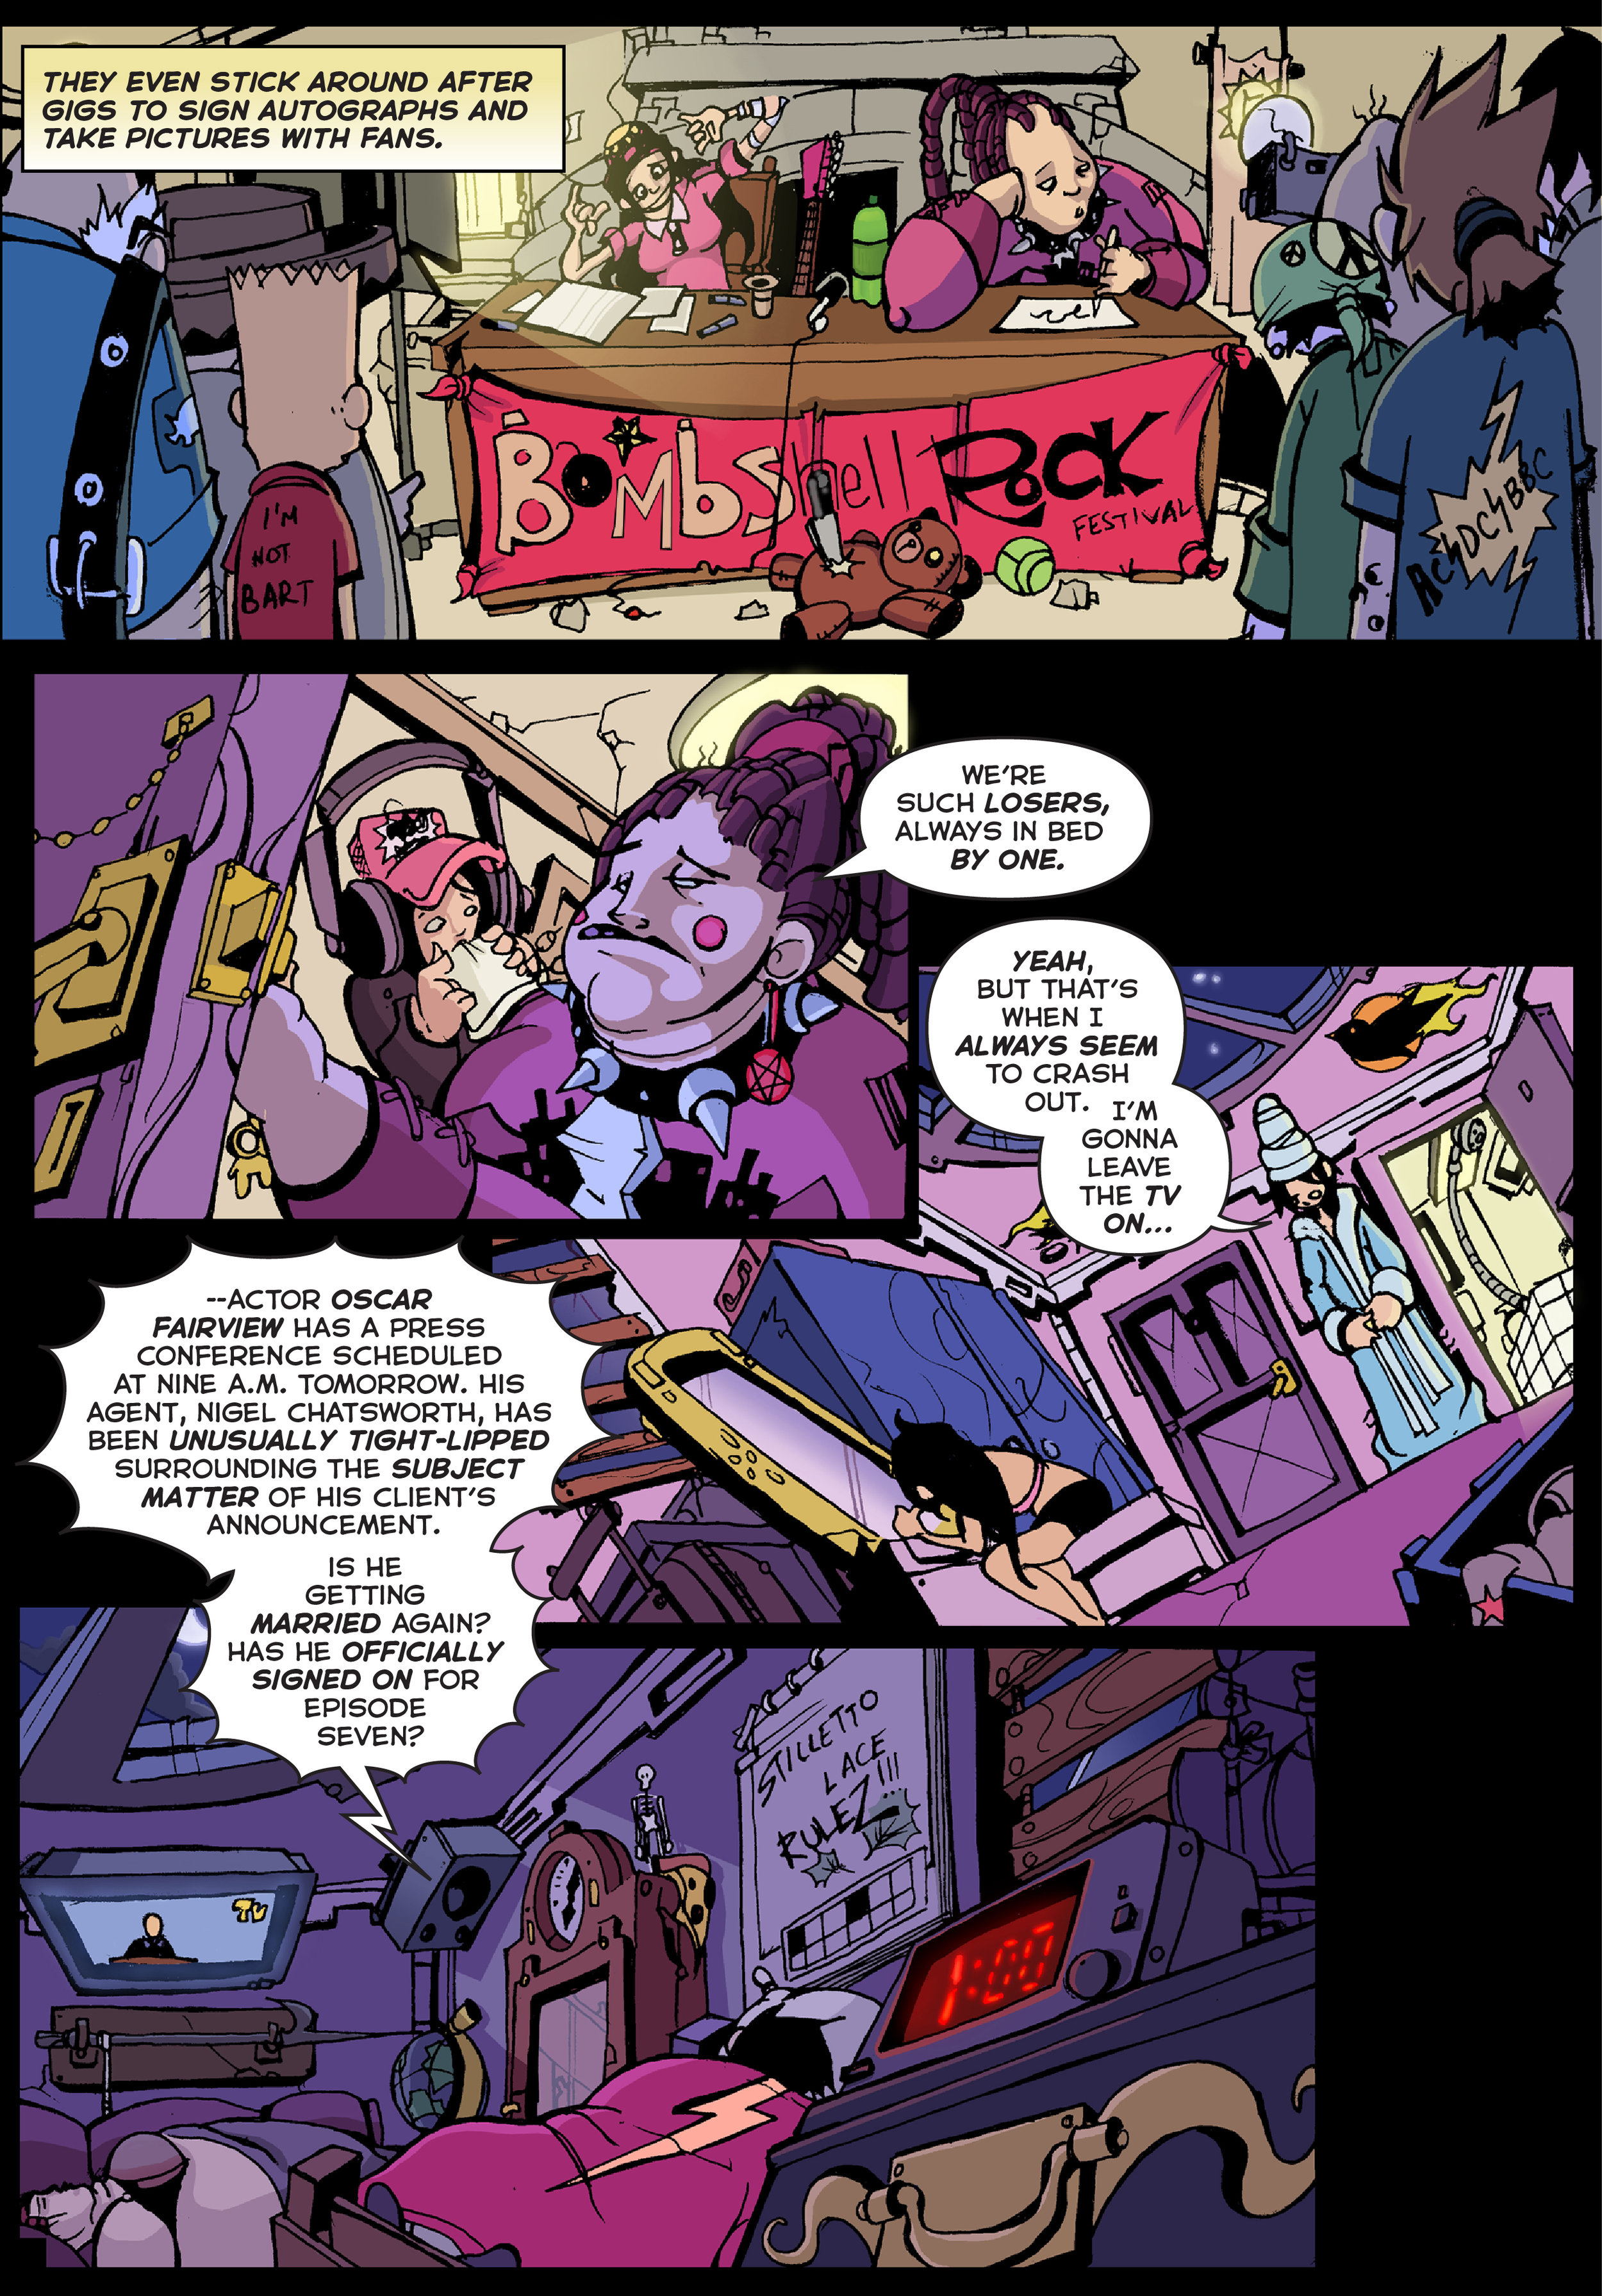 Pink Power 1 page 15.jpg